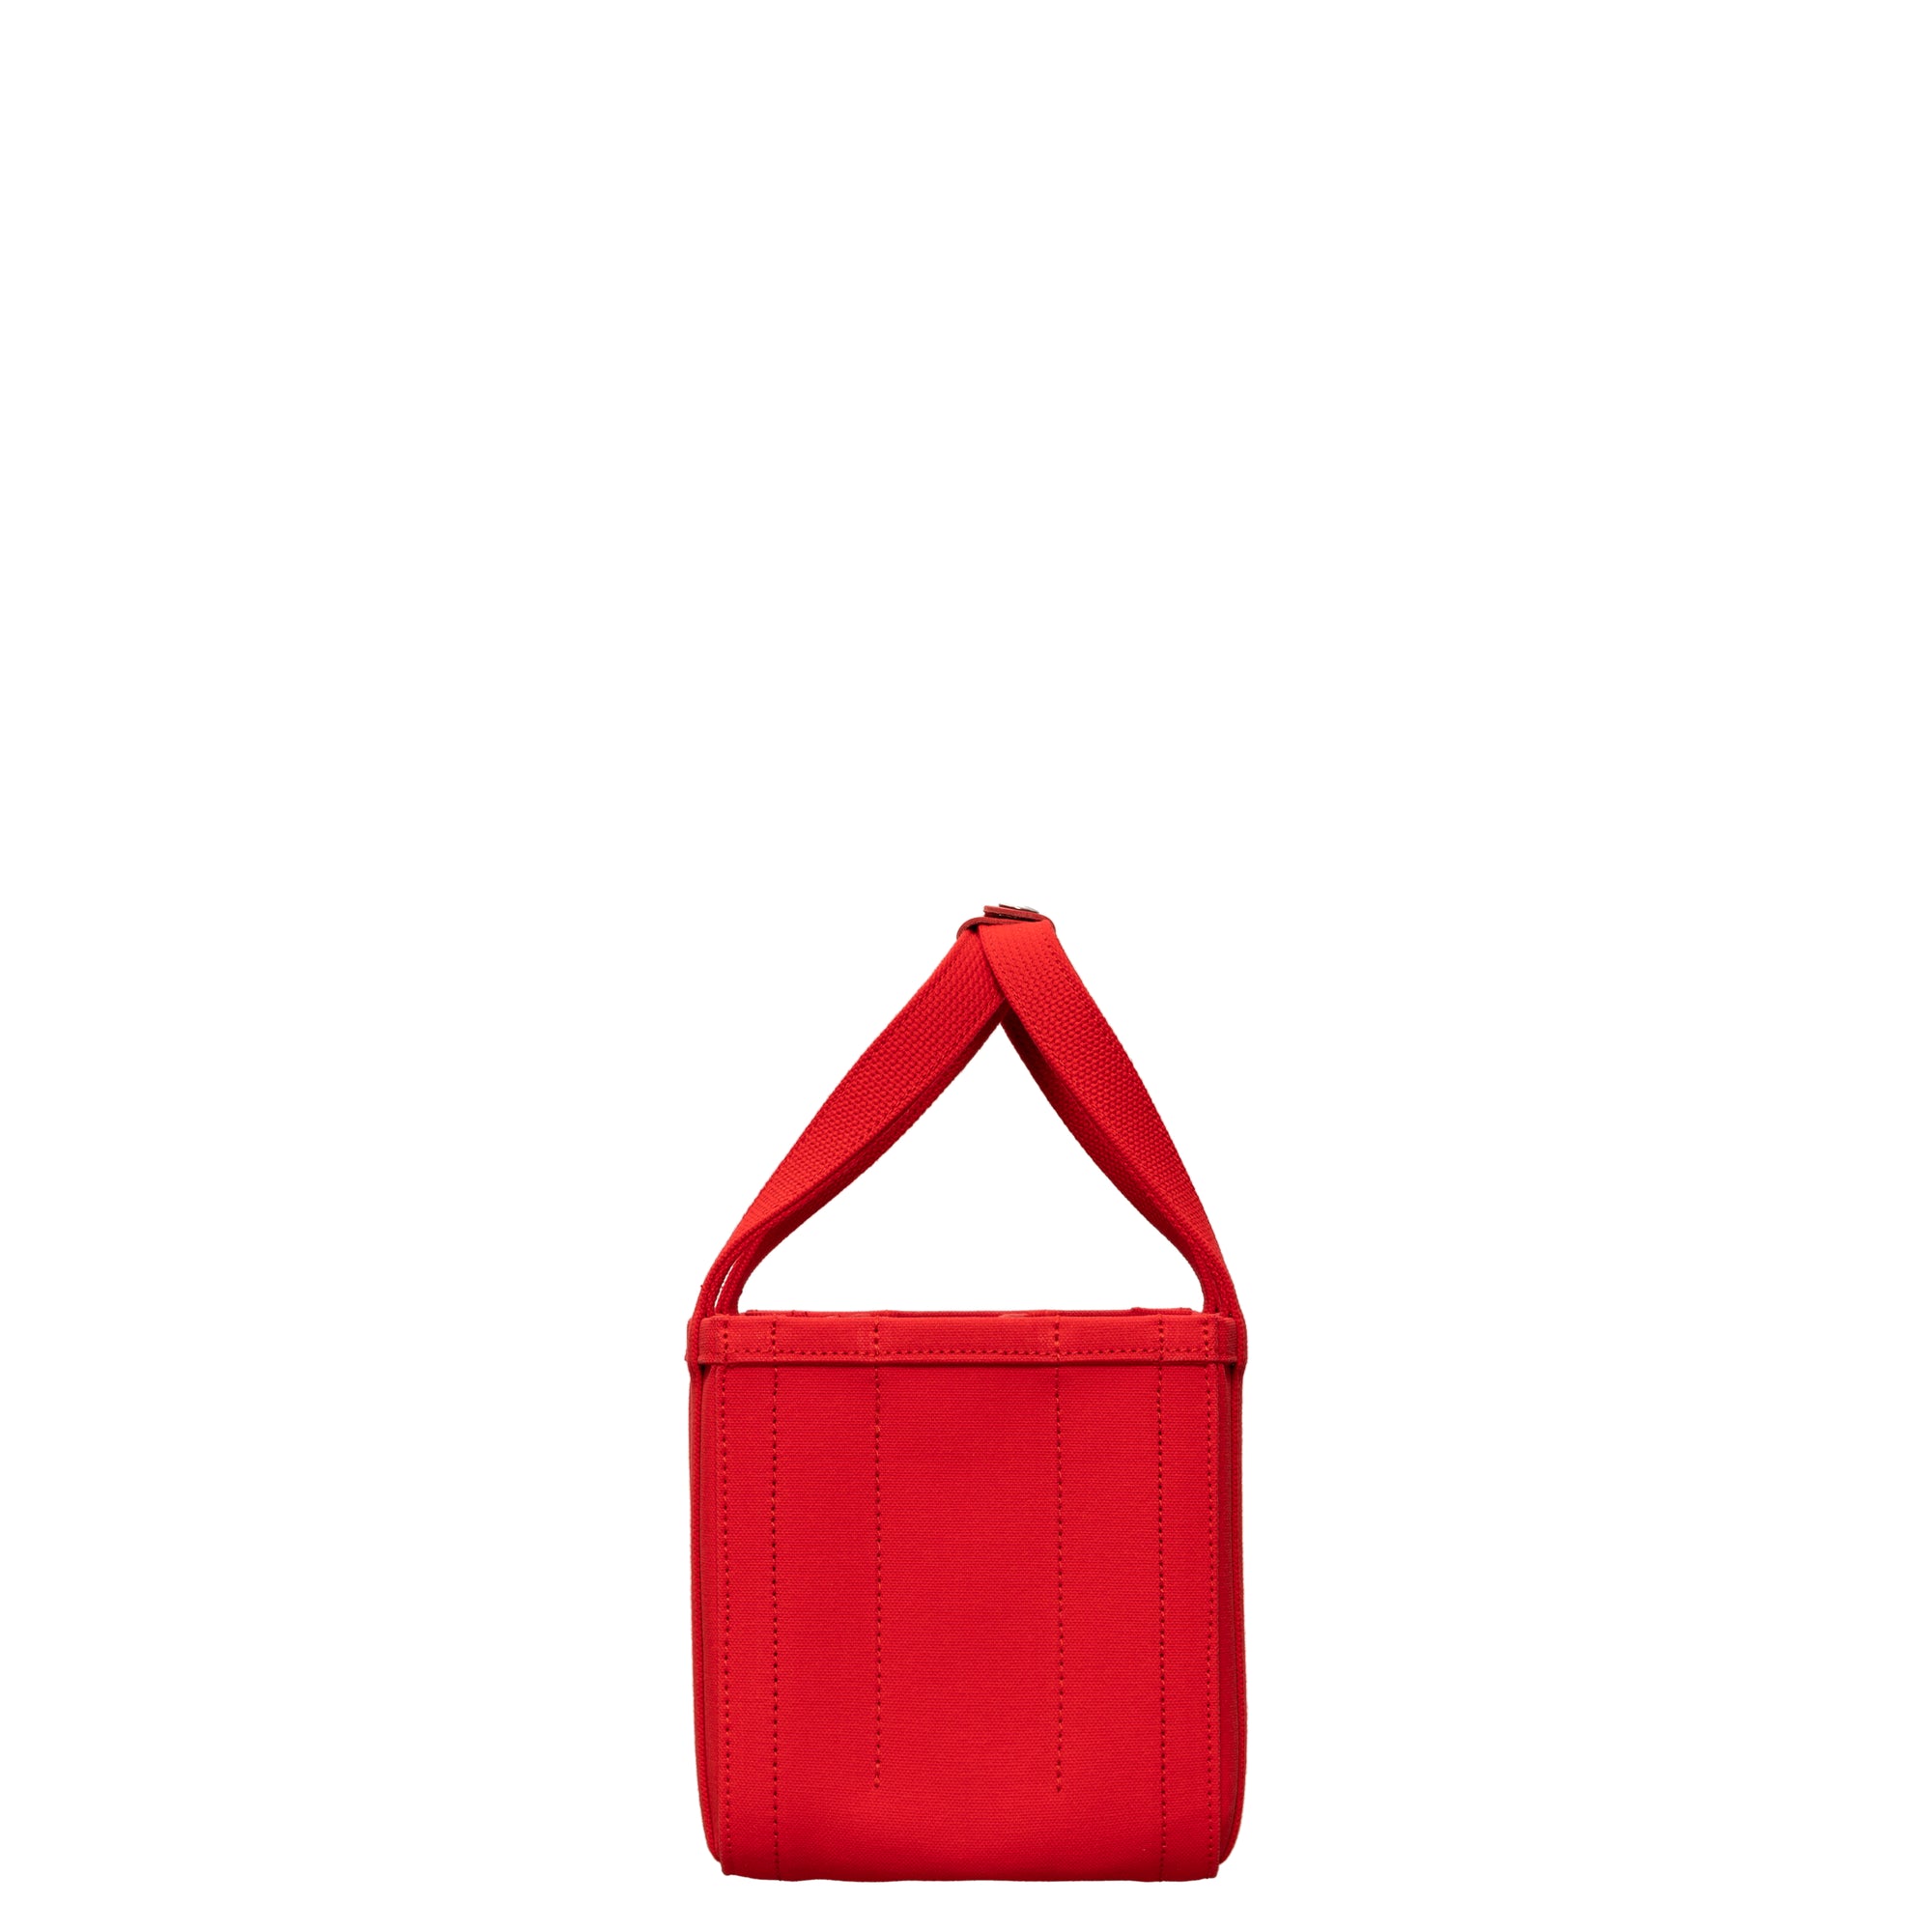 CHACOLI - 07 TOTE W240 X H200 X D180 - (RED) view 2